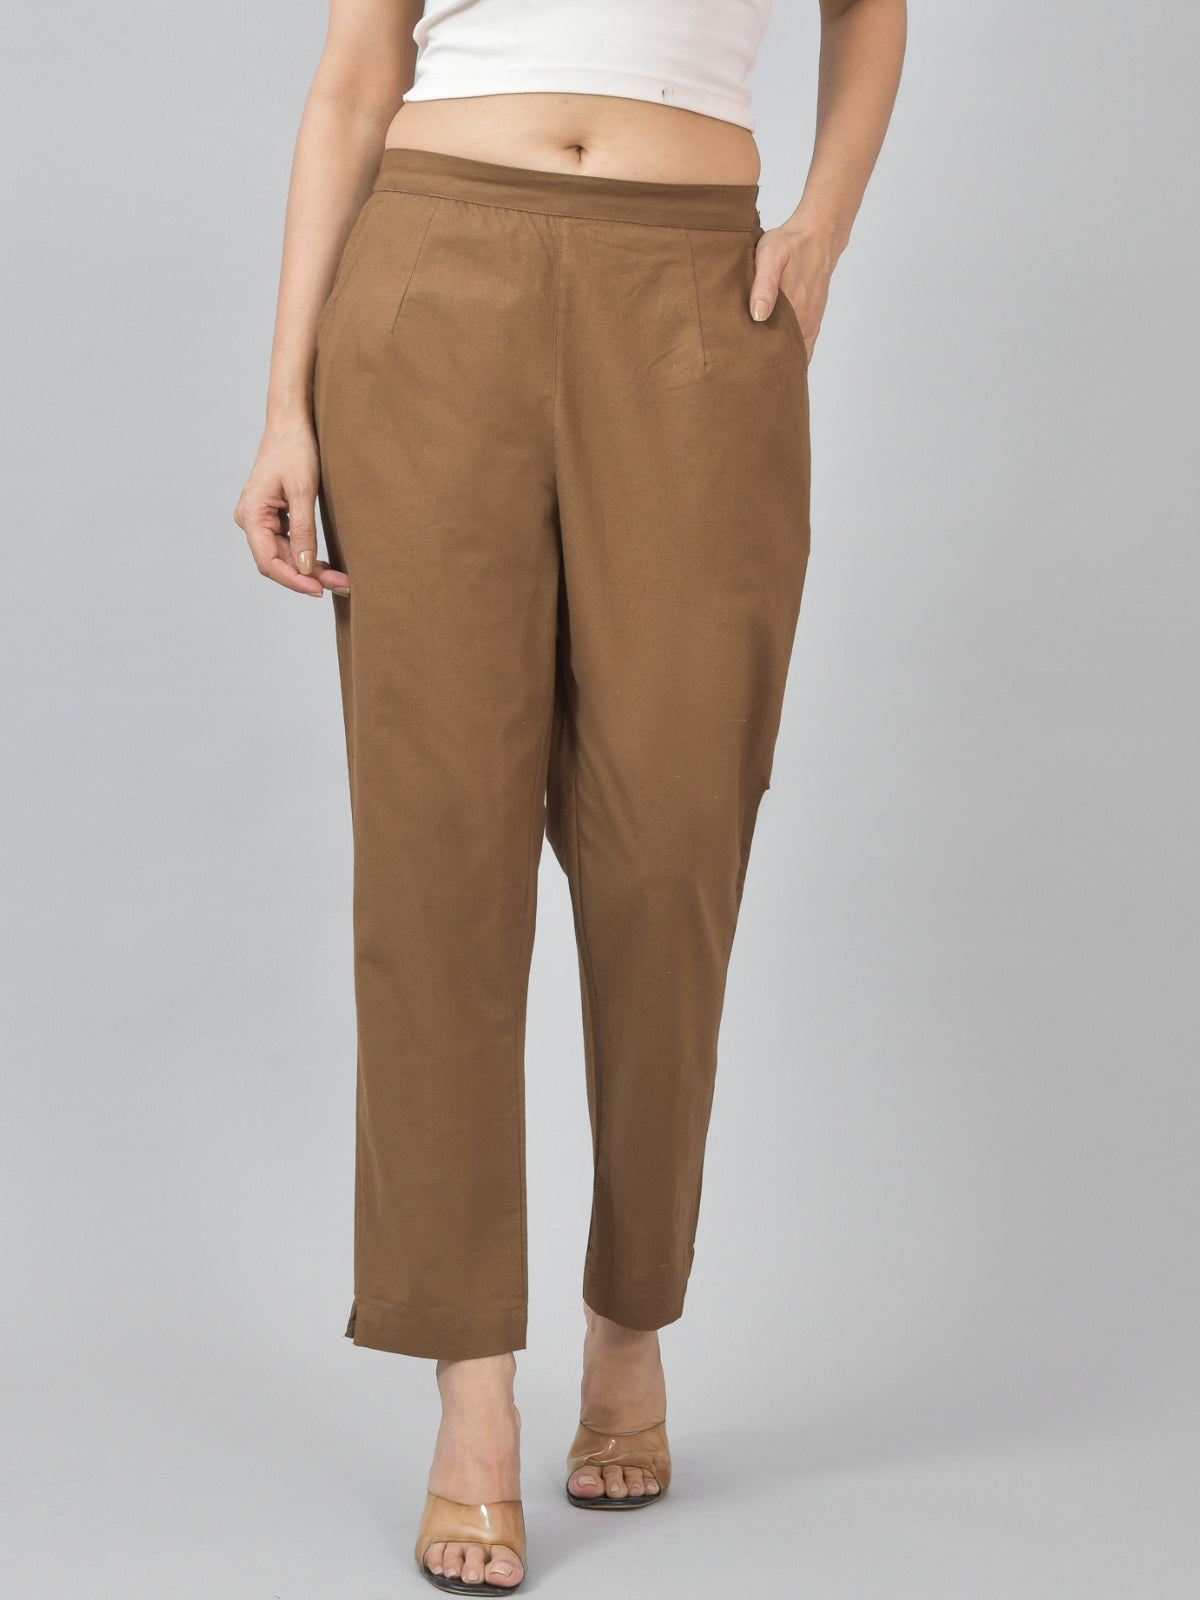 Pack Of 2 Womens Half Elastic Brown And White Deep Pocket Cotton Pants